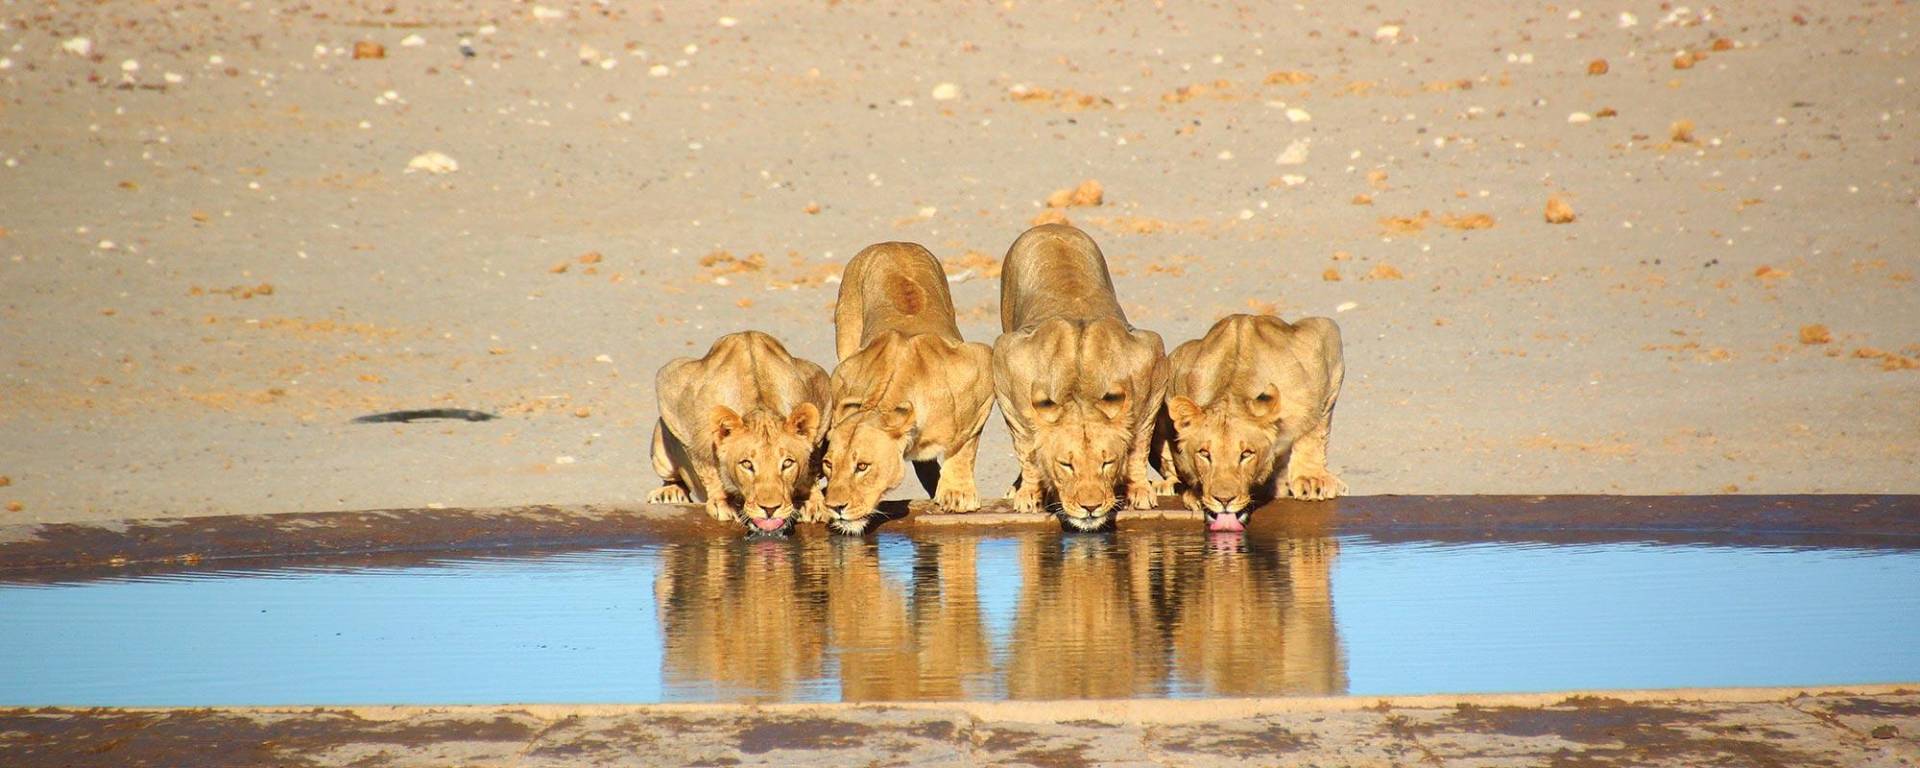 Lions at a waterhole in the Etosha National Park